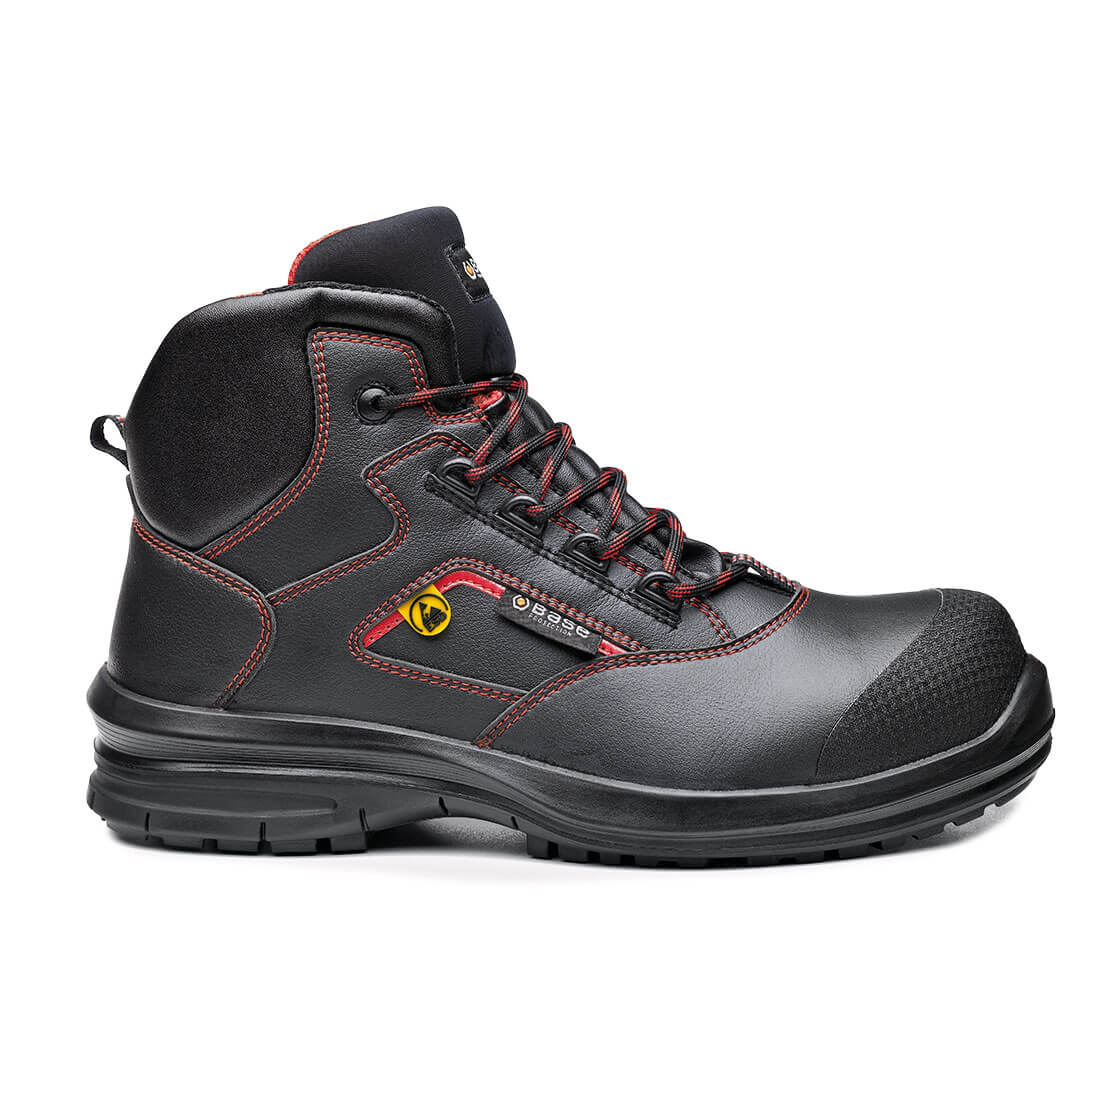 Base Matar Top Toe Cap Work Safety Boots Black/Red 1#colour_black-red